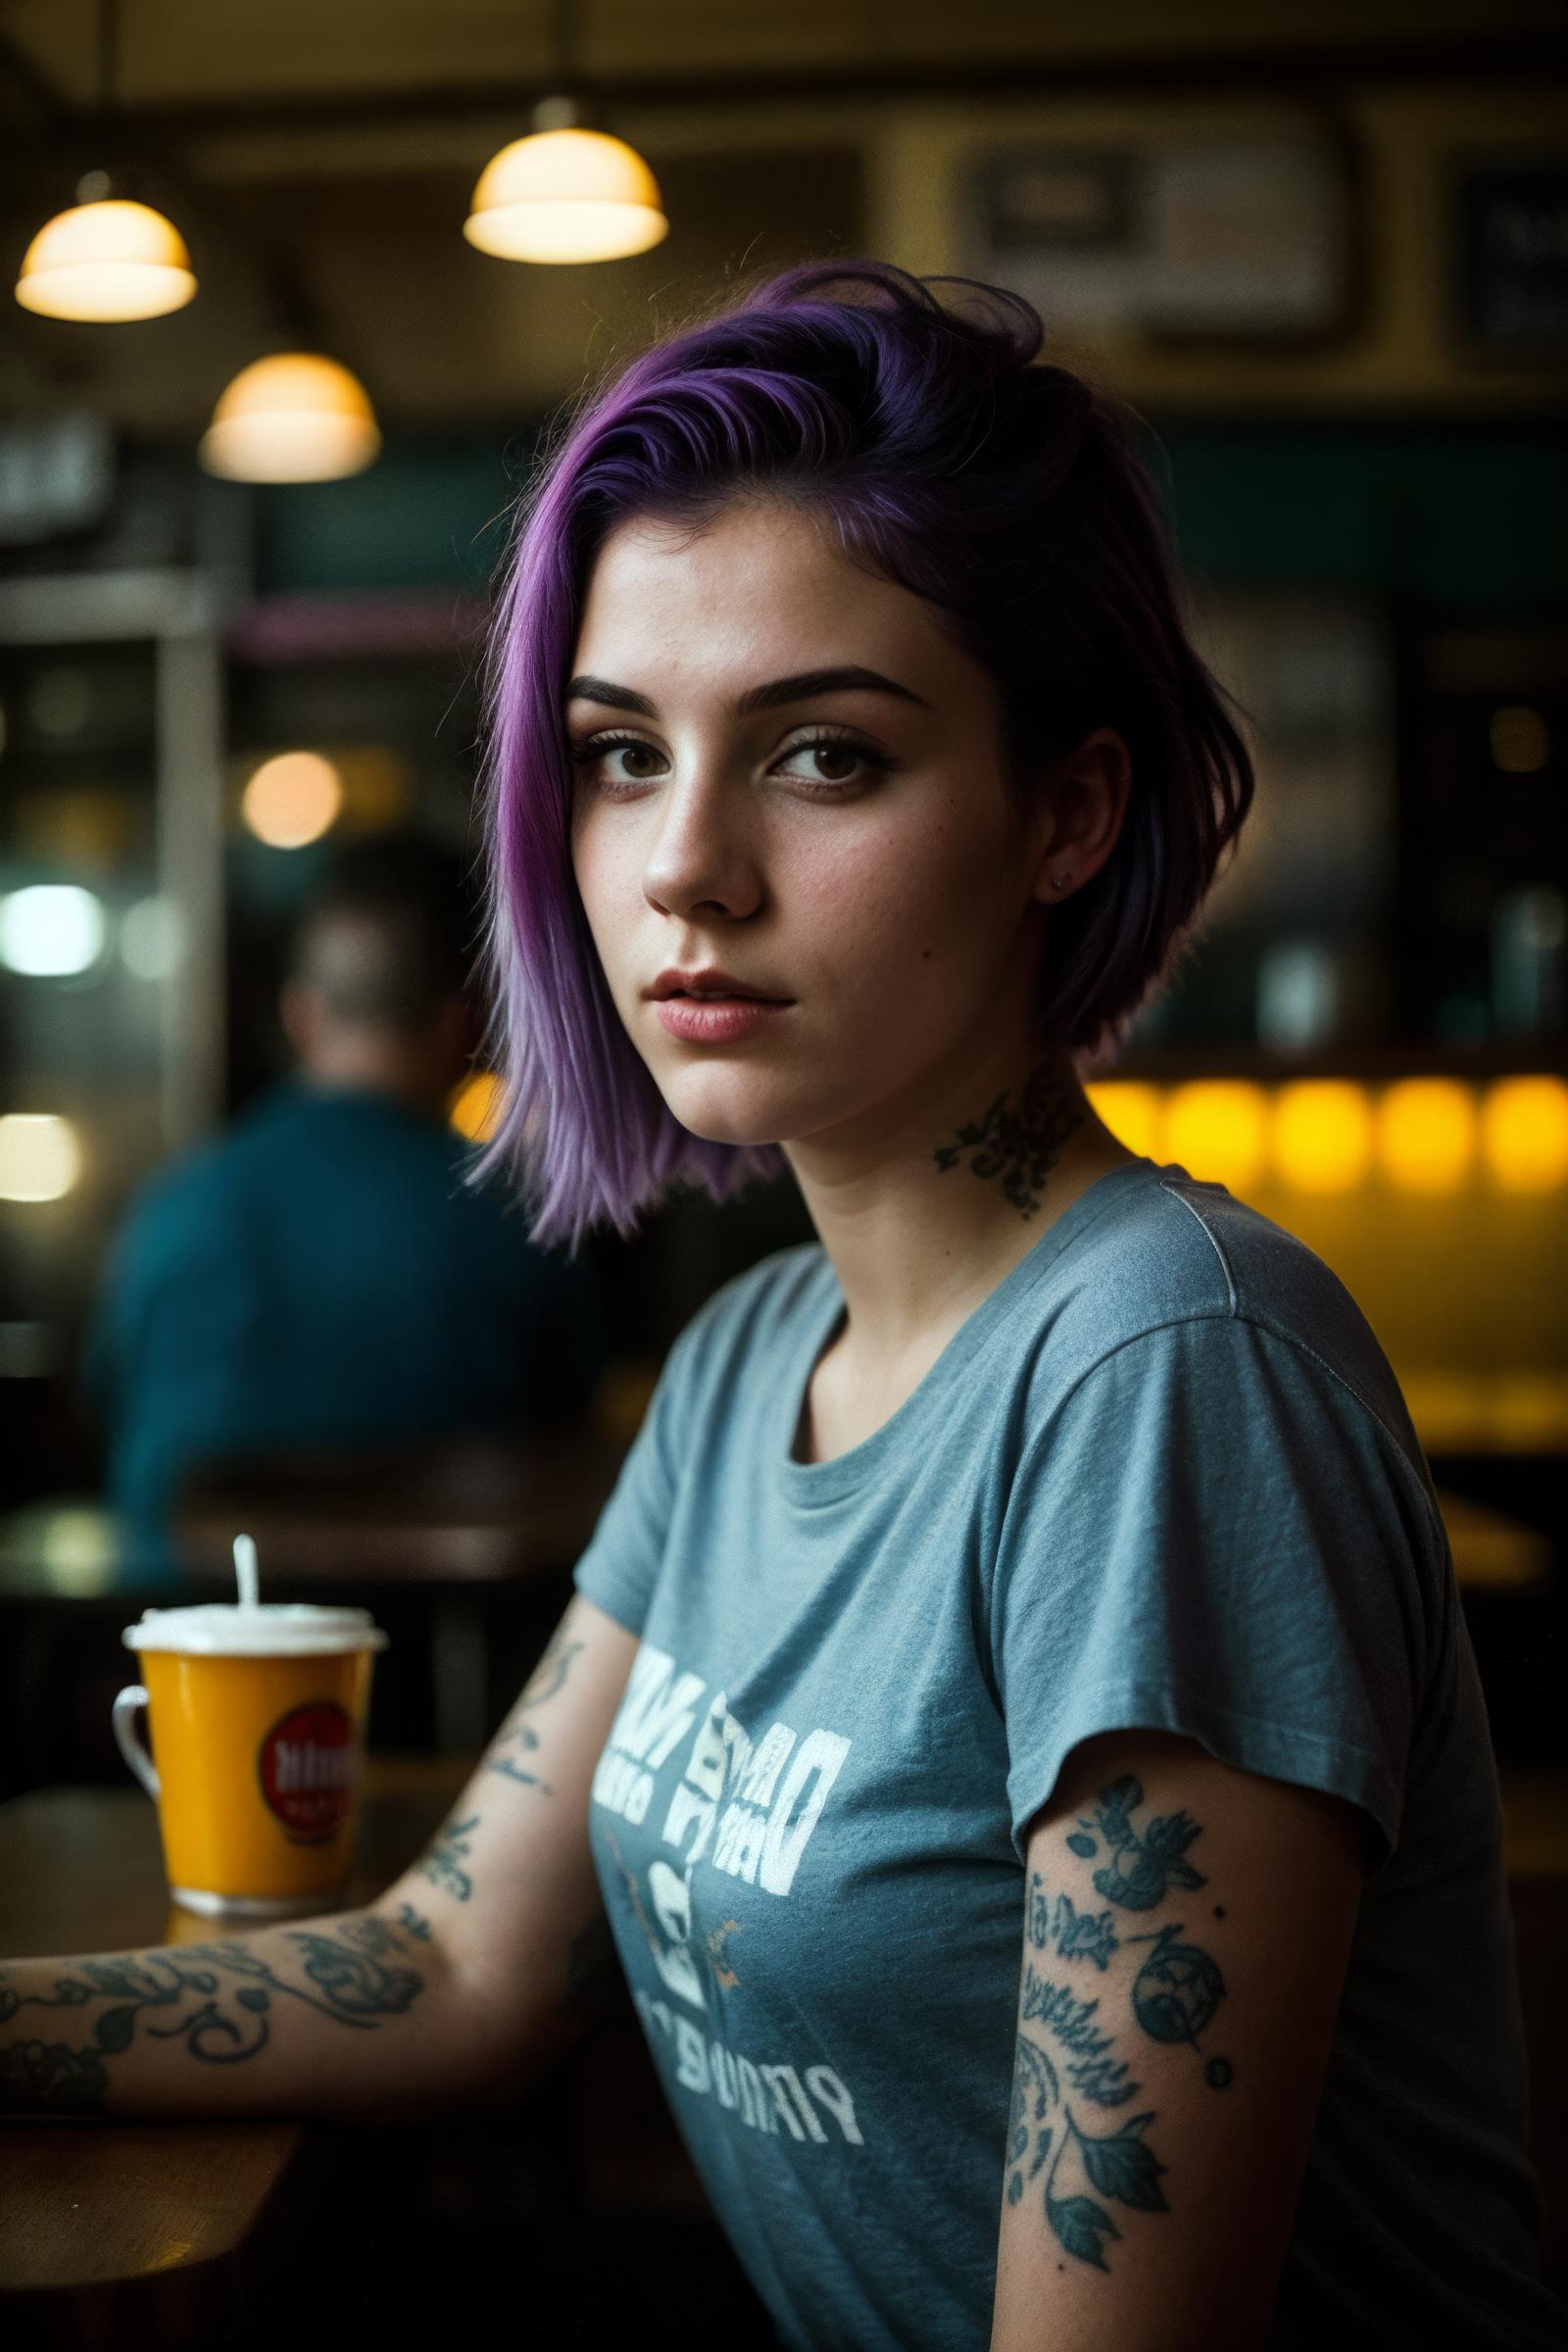 A young woman with purple hair, tattoos, and a nose piercing sits at a dining table with a drink.